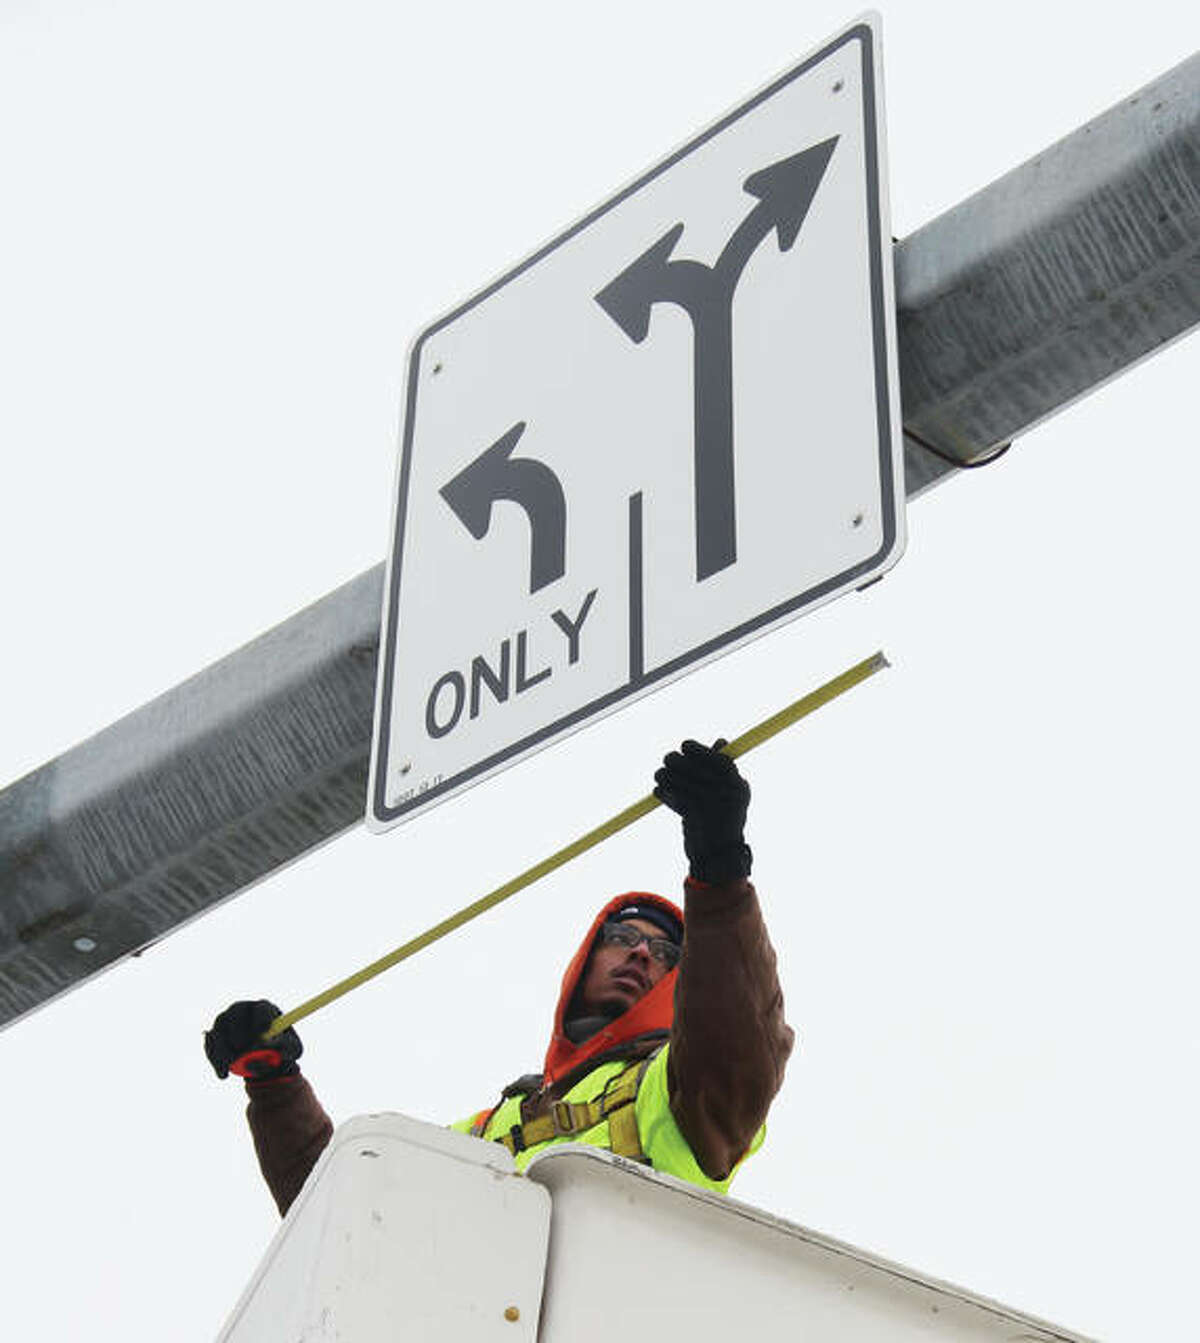 Chris Morgan, an employee of Wegman Electric Inc. of Bethalto, measures before installing conduit on a monotube sign truss on the Clark Bridge on Thursday morning. The conduit will hold wires that will provide electricity to a license plate recognition camera system that Wegman workers will install Friday. The cameras are set to begin operating this weekend, alerting police to any vehicle that is reported stolen or if the owner has a felony warrant. The cameras, by recording license plates of passing cars and trucks, also will assist police in identifying owner of a vehicle used in a crime. Alton, Godfrey and Madison County State’s Attorney’s Office are sharing cost of the cameras.